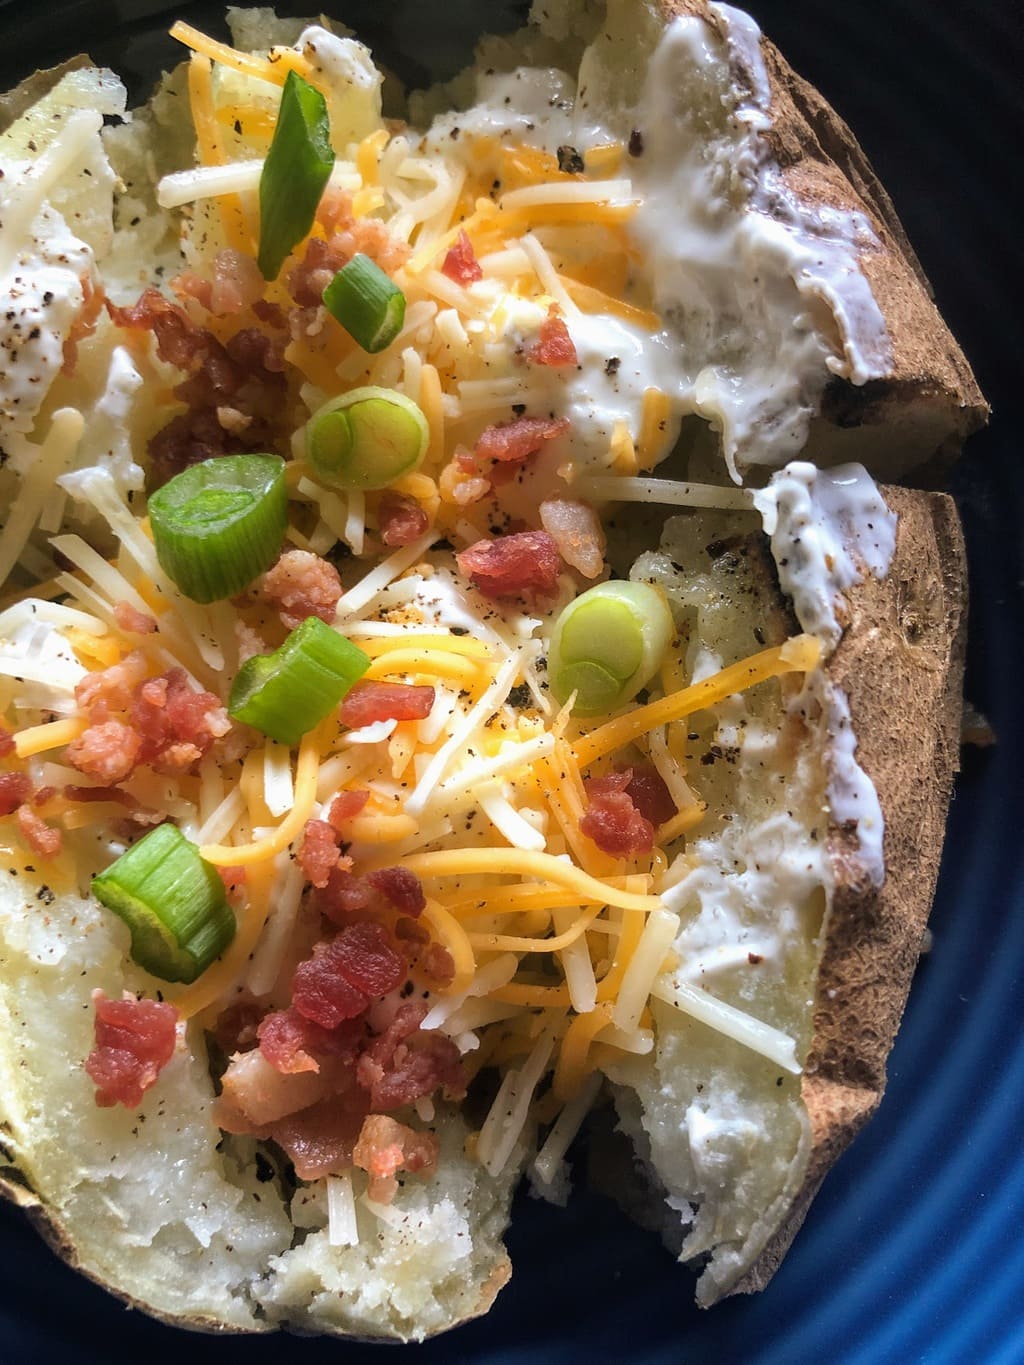 baked potato with scallions, cheese, bacon and sour cream